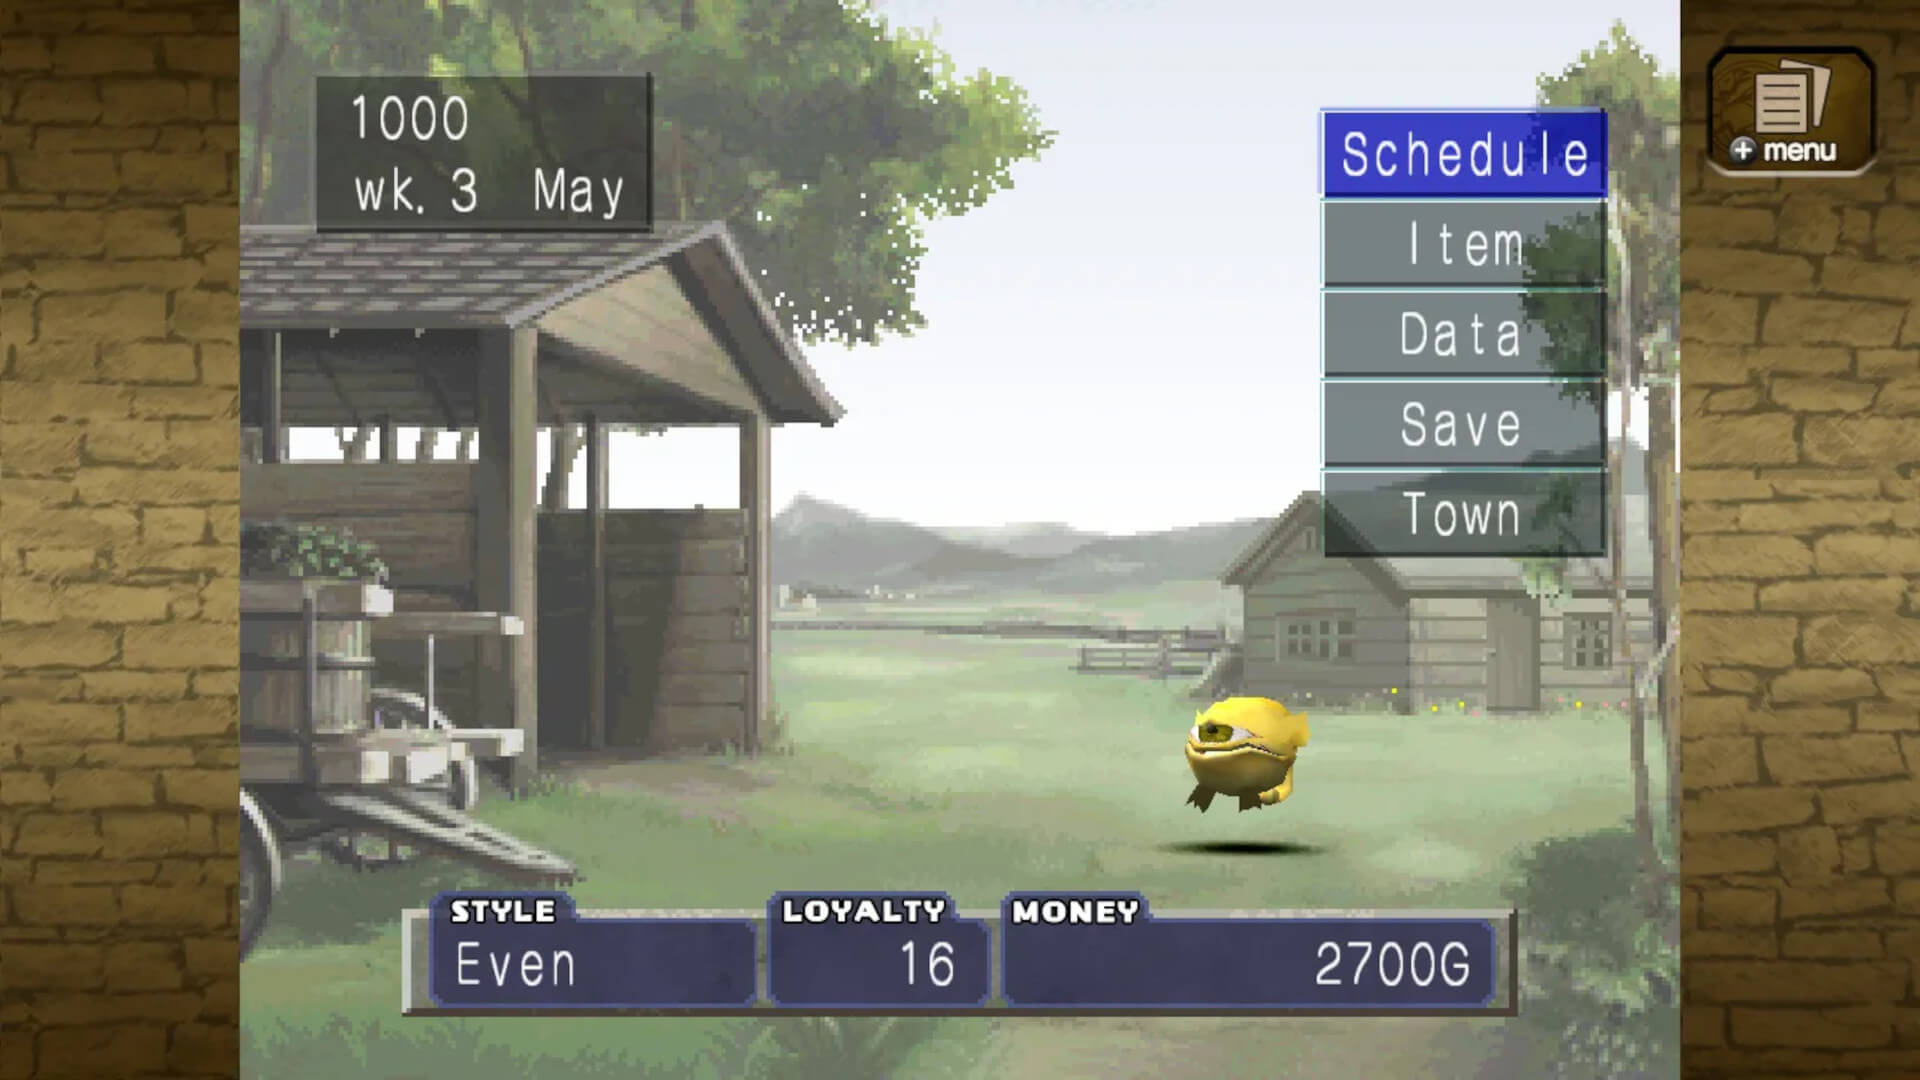 A shot of Monster Rancher 1 & 2 DX on Switch, which has inadvertently revealed the existence of a Detective Pikachu sequel